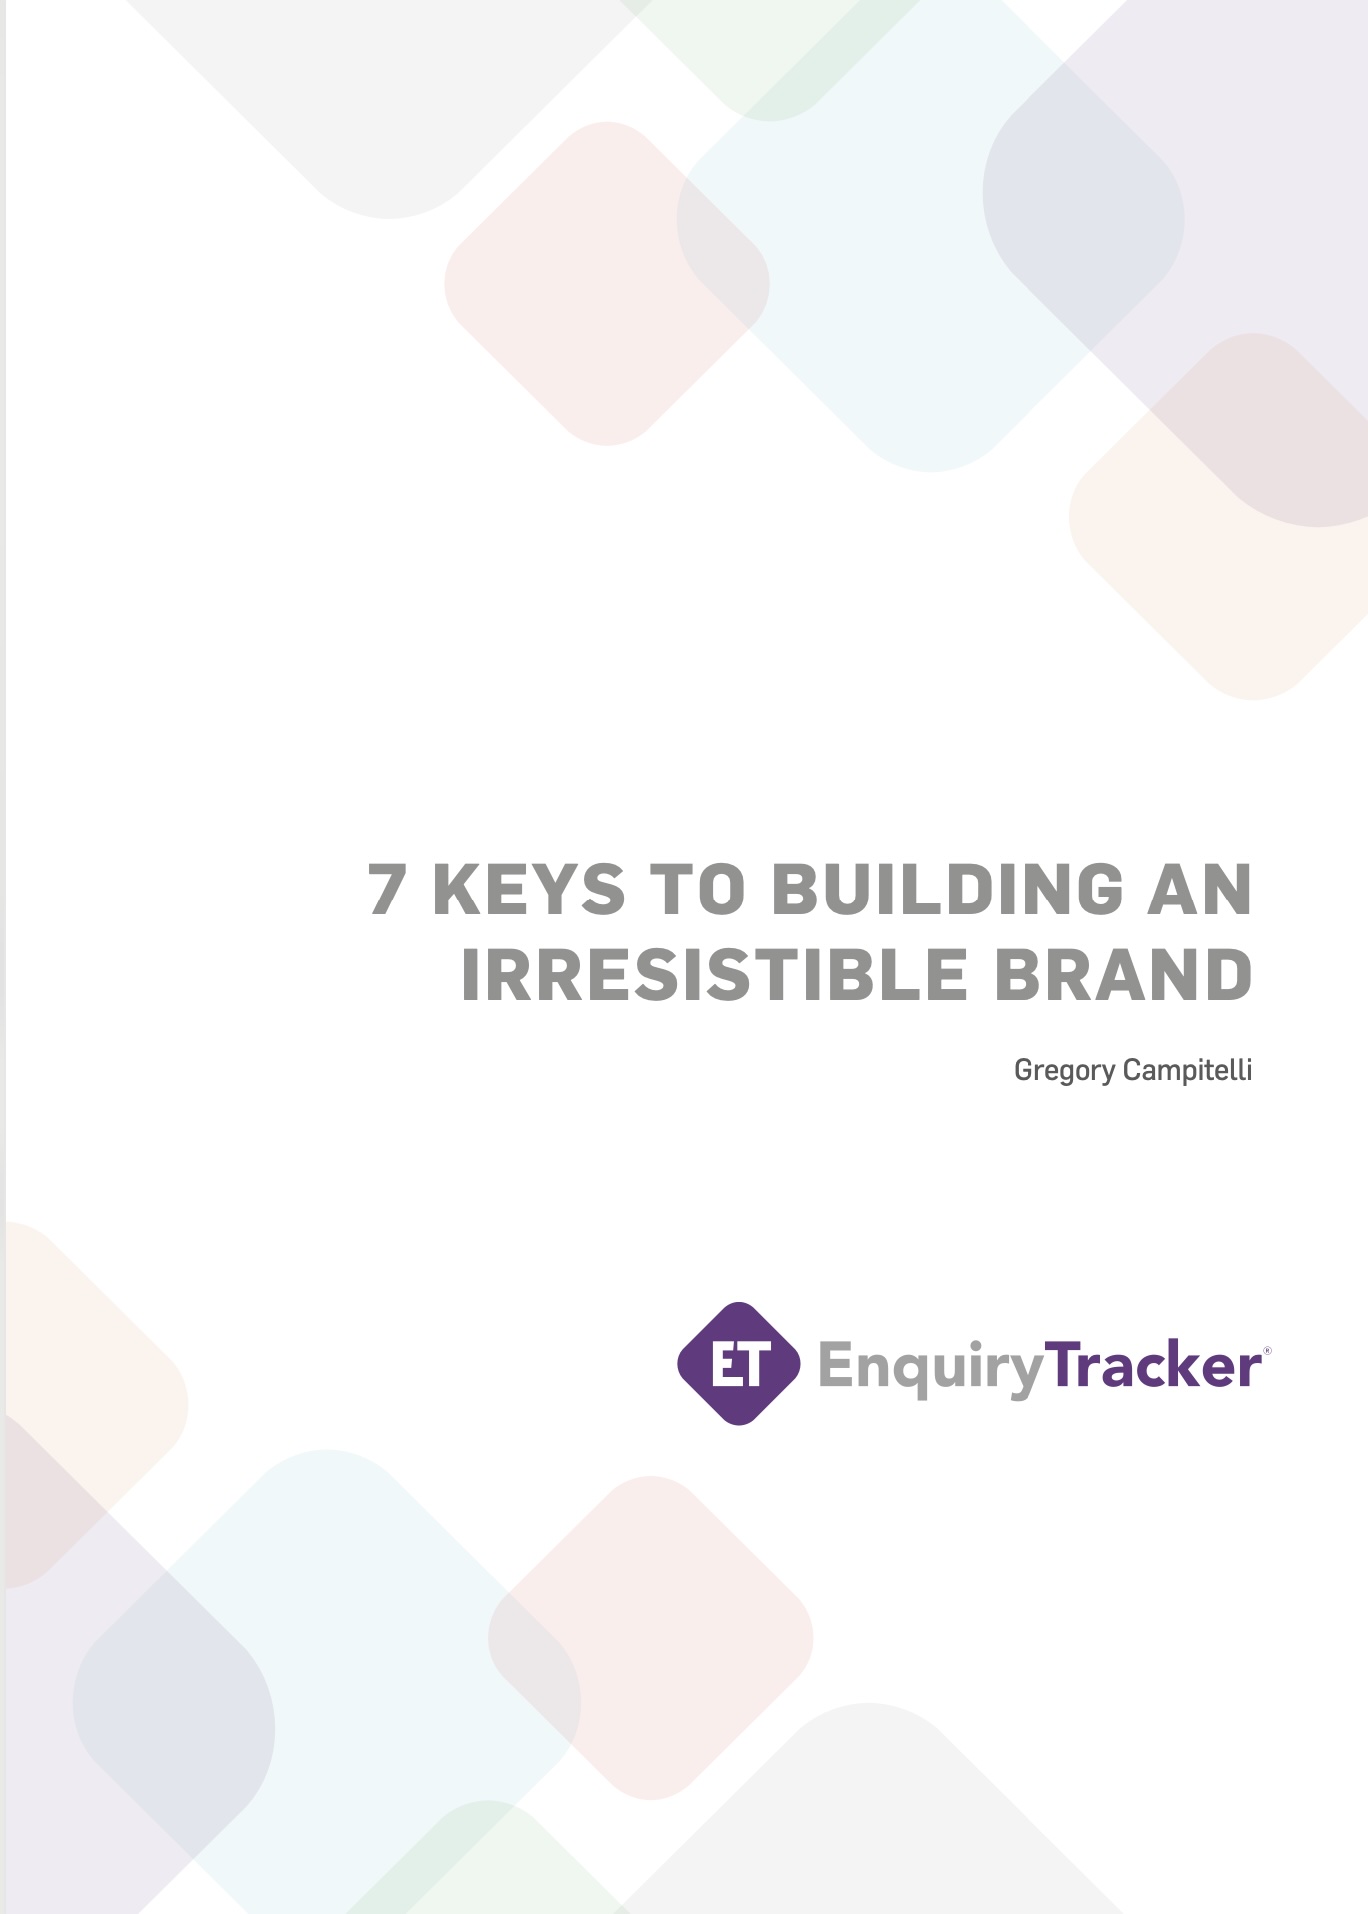 7 keys to building an irresistible brand for your school